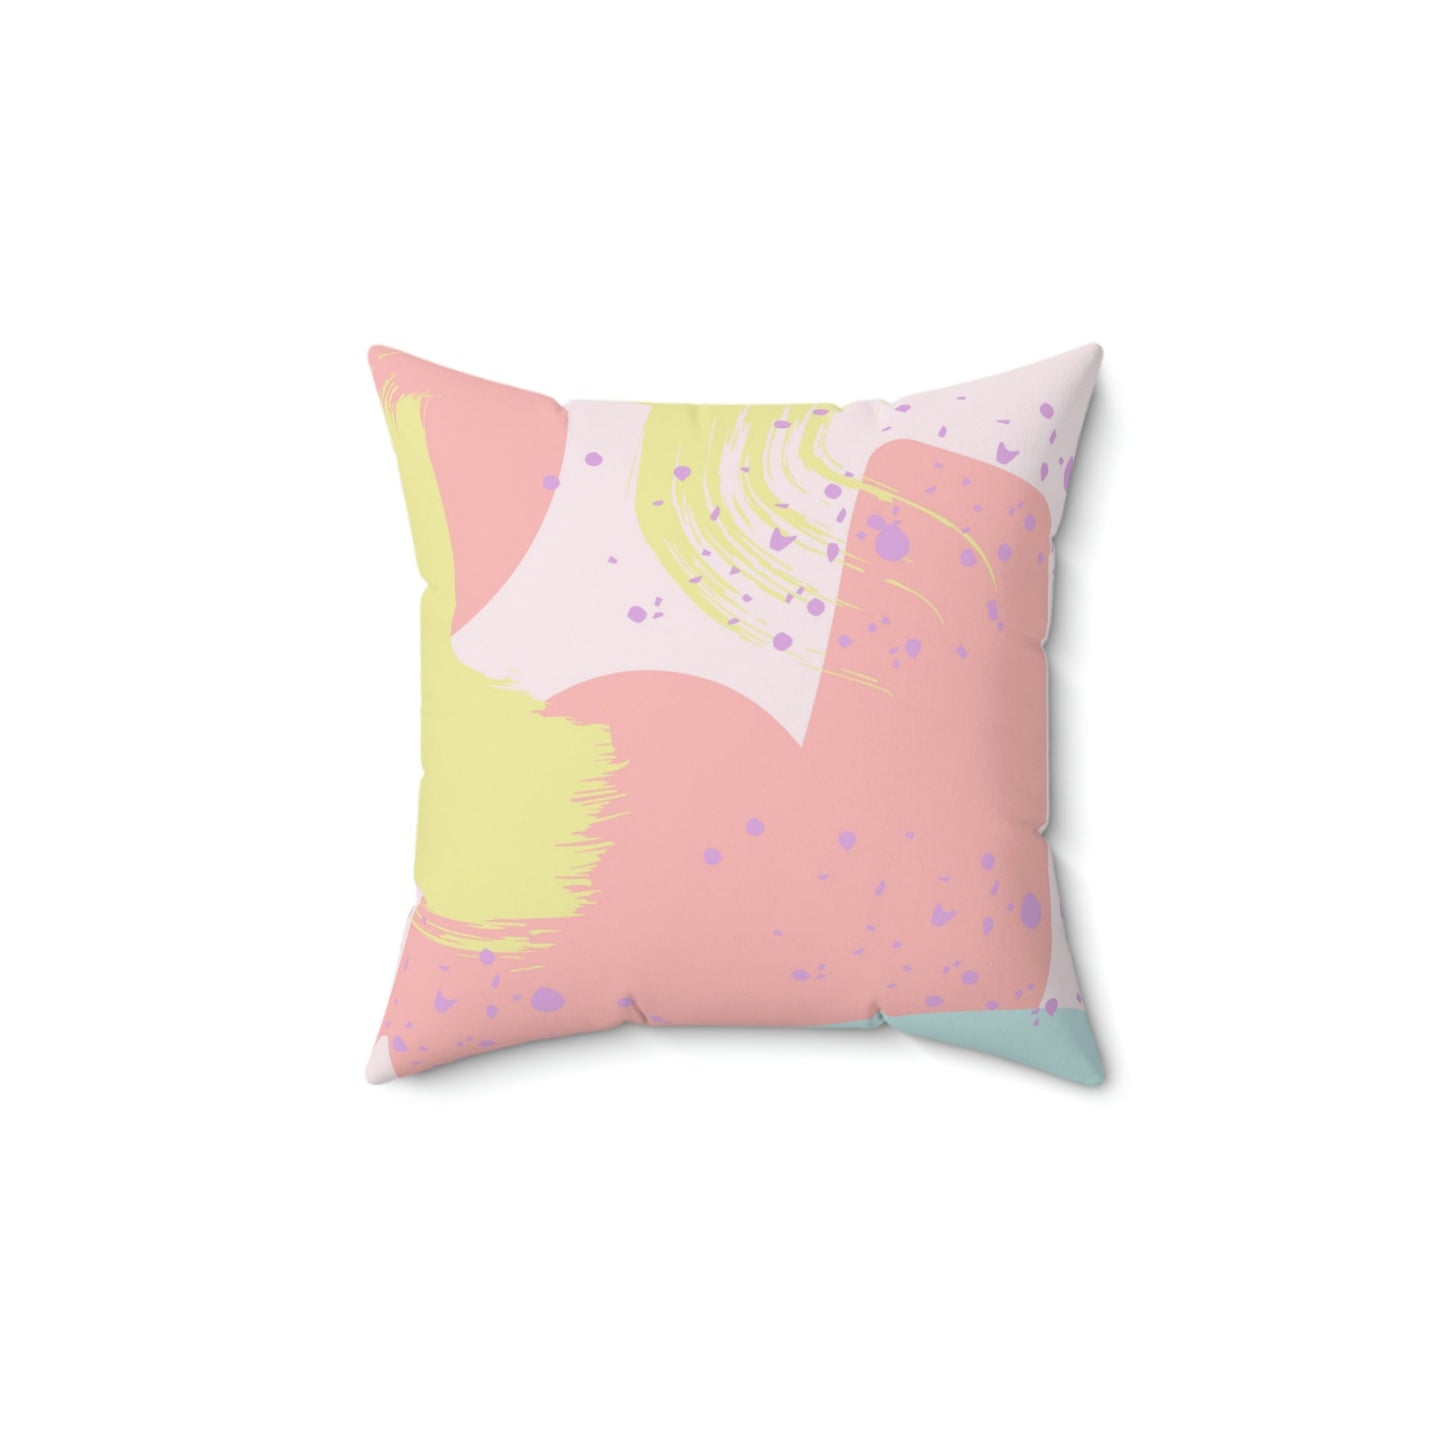 True Artist Square Pillow Home Decor Pink Sweetheart